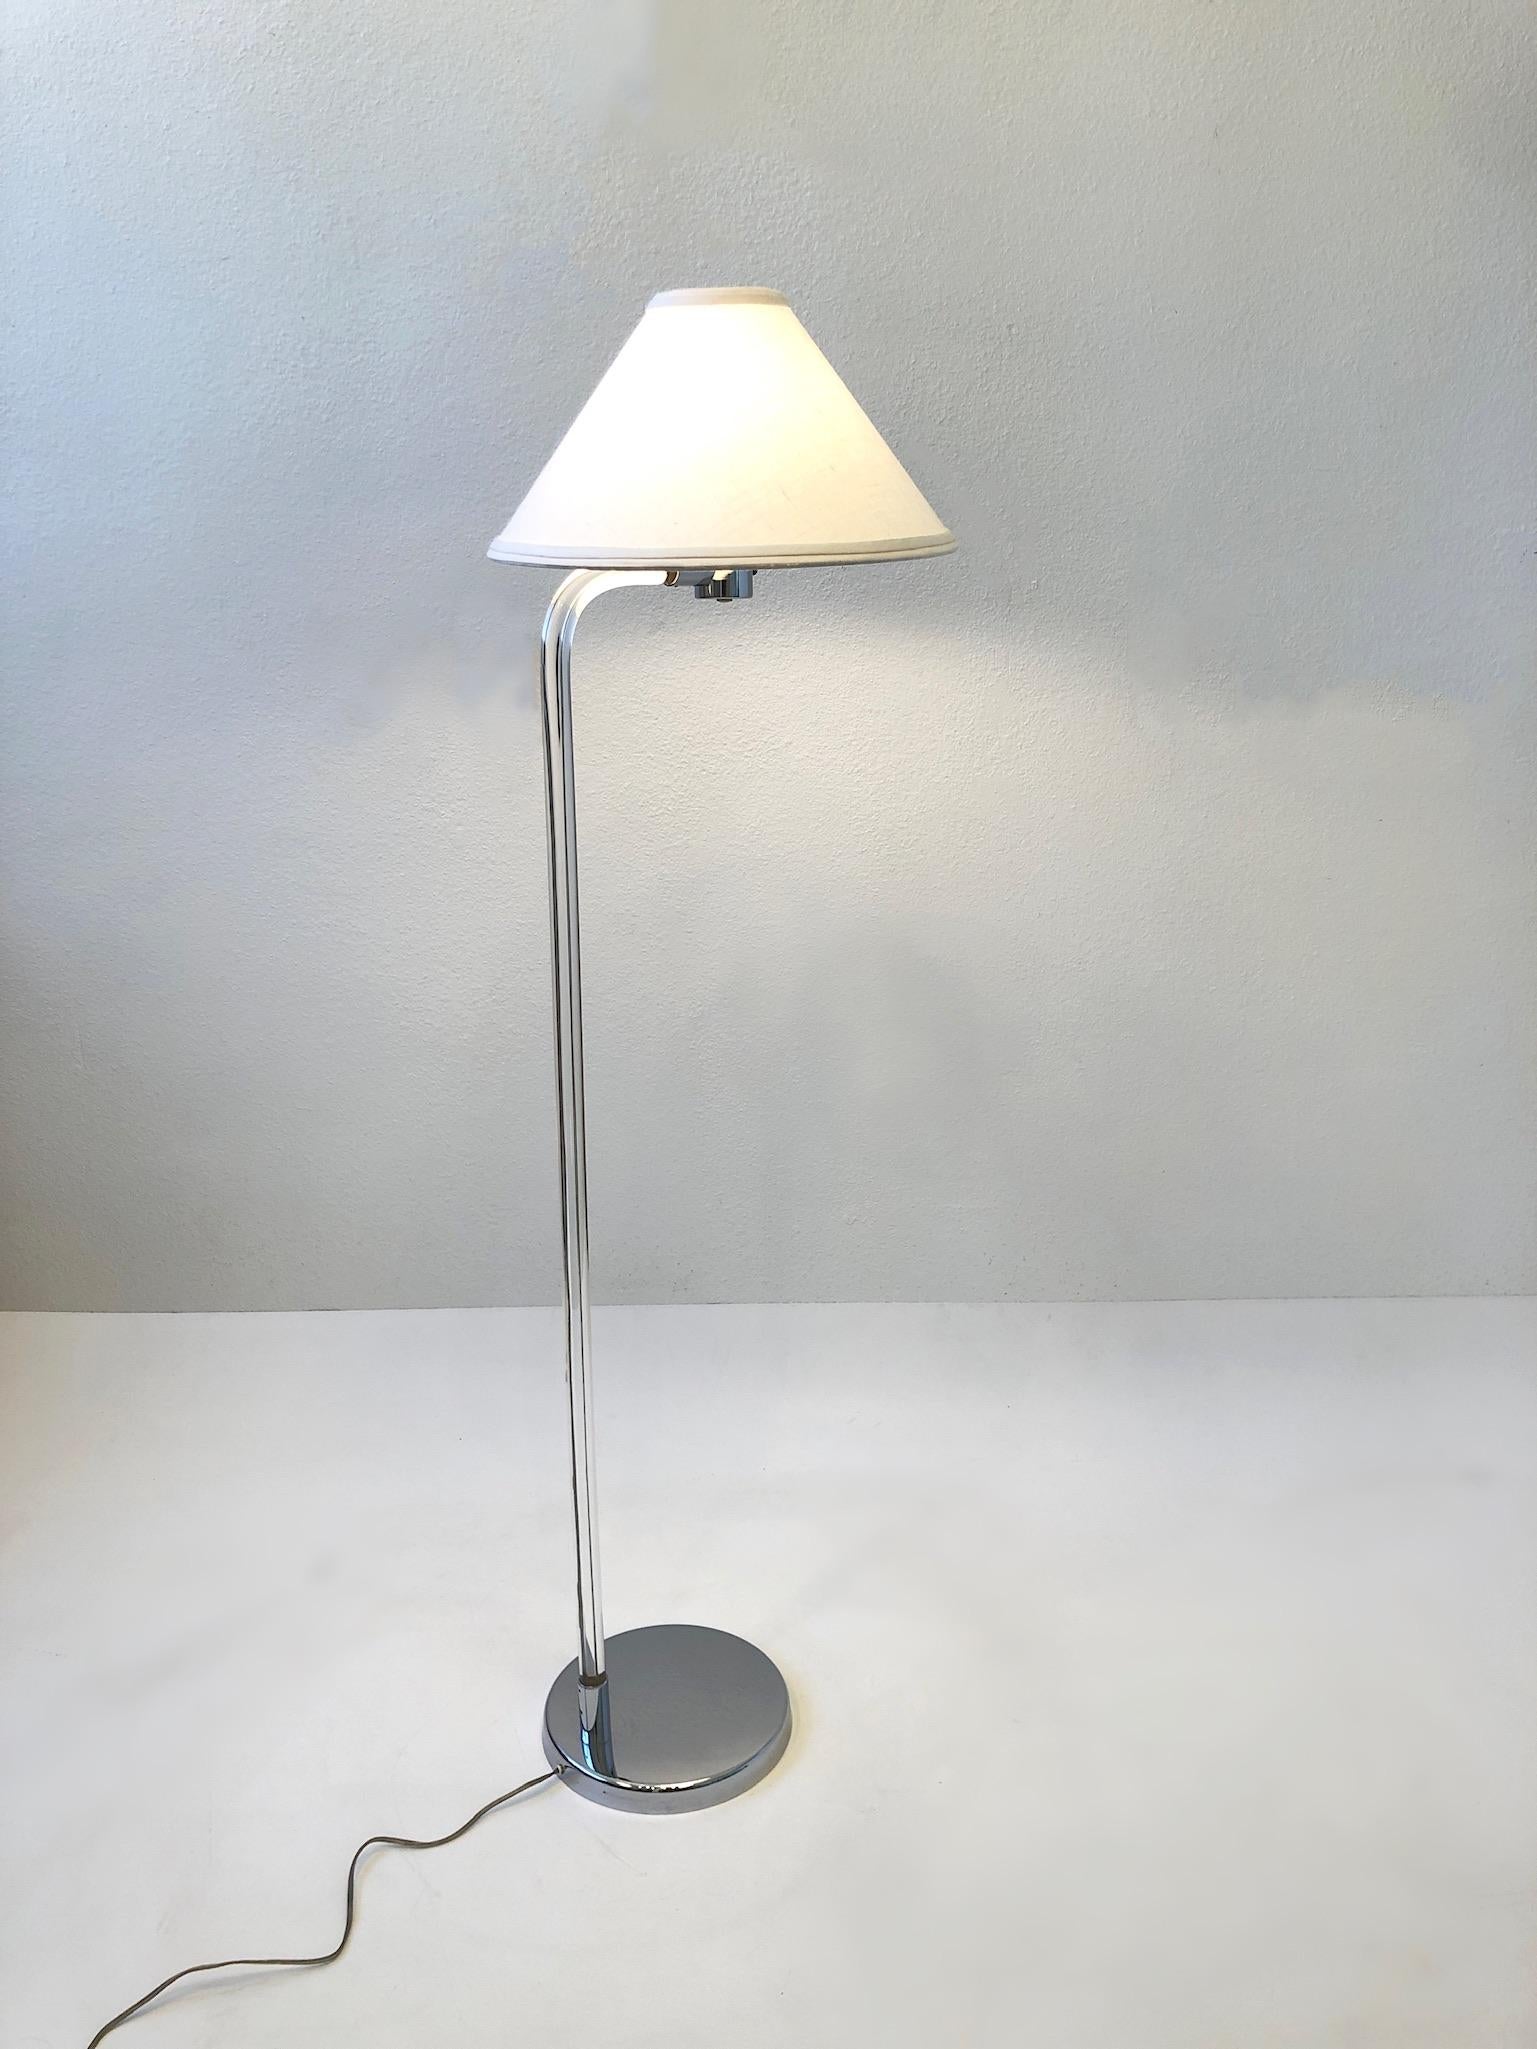 1970’s clear lucite and polish chrome with linen shade by Peter Hamburger.
In original condition with minor wear consistent with age. 
It takes a regular Edison lightbulb 75w max. 
Measurements: 17” Wide, 16” Deep, 53.5” High, 44.75” High to